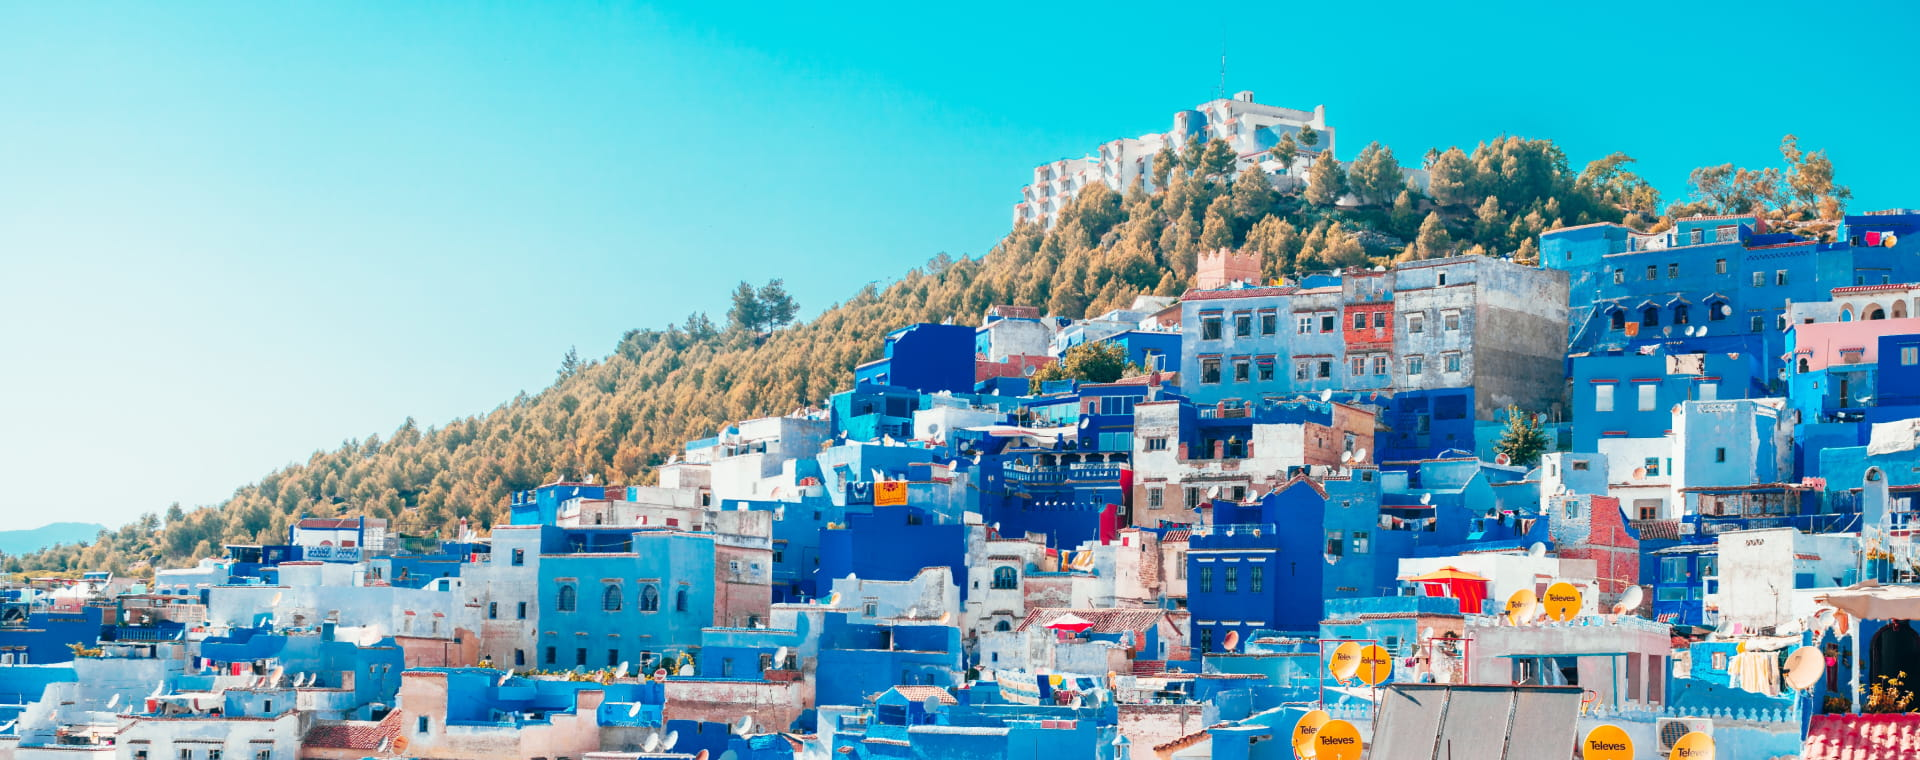 The blue city of chefchaouen, morocco.